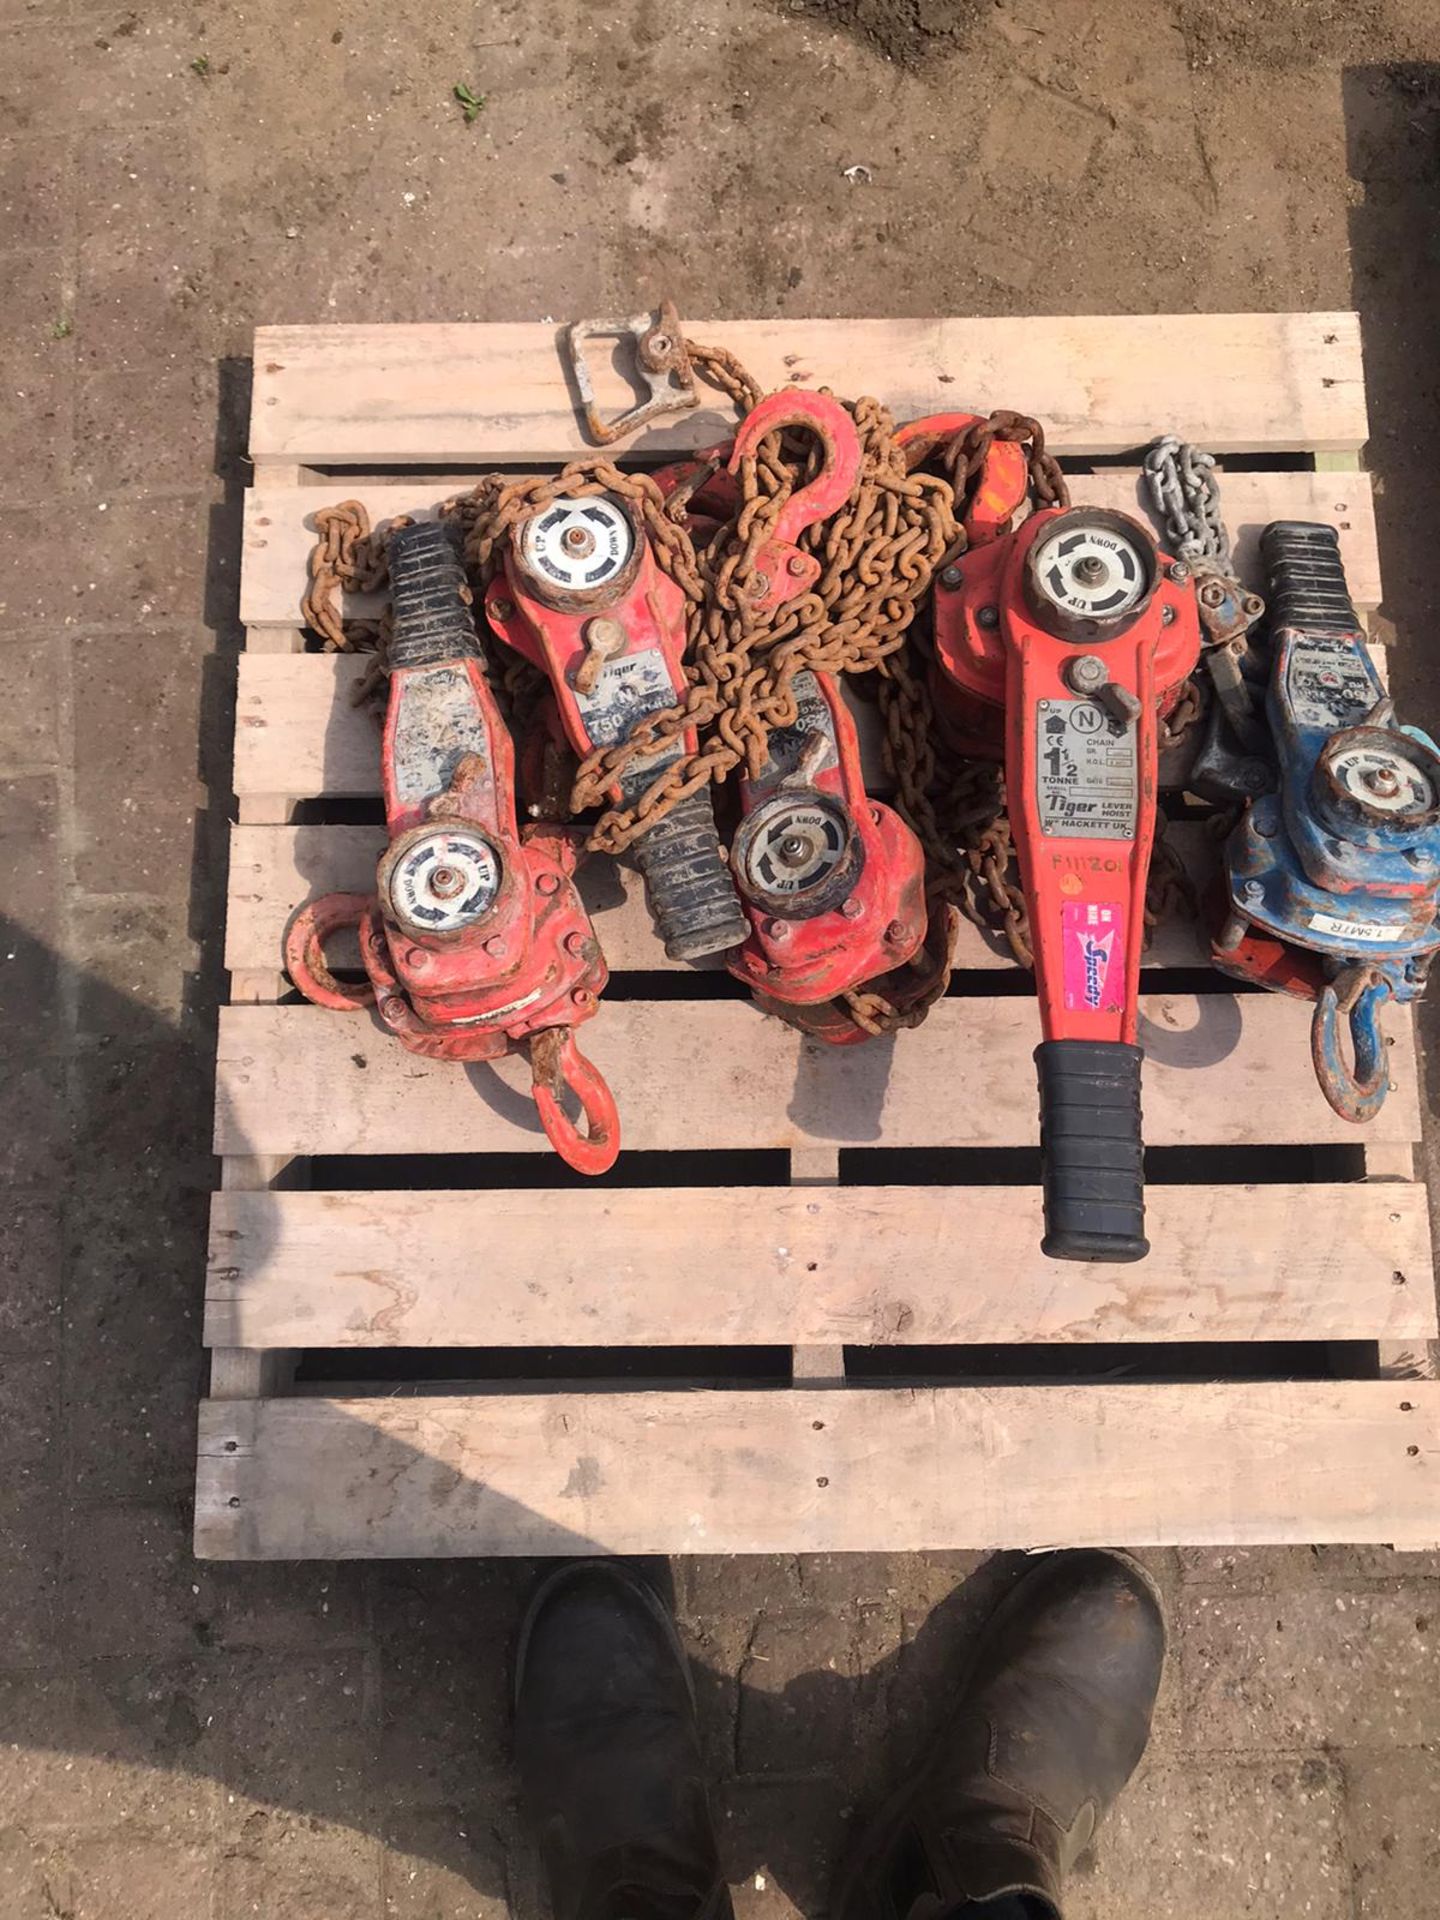 Pallet containing 5x block & chain Pulleys